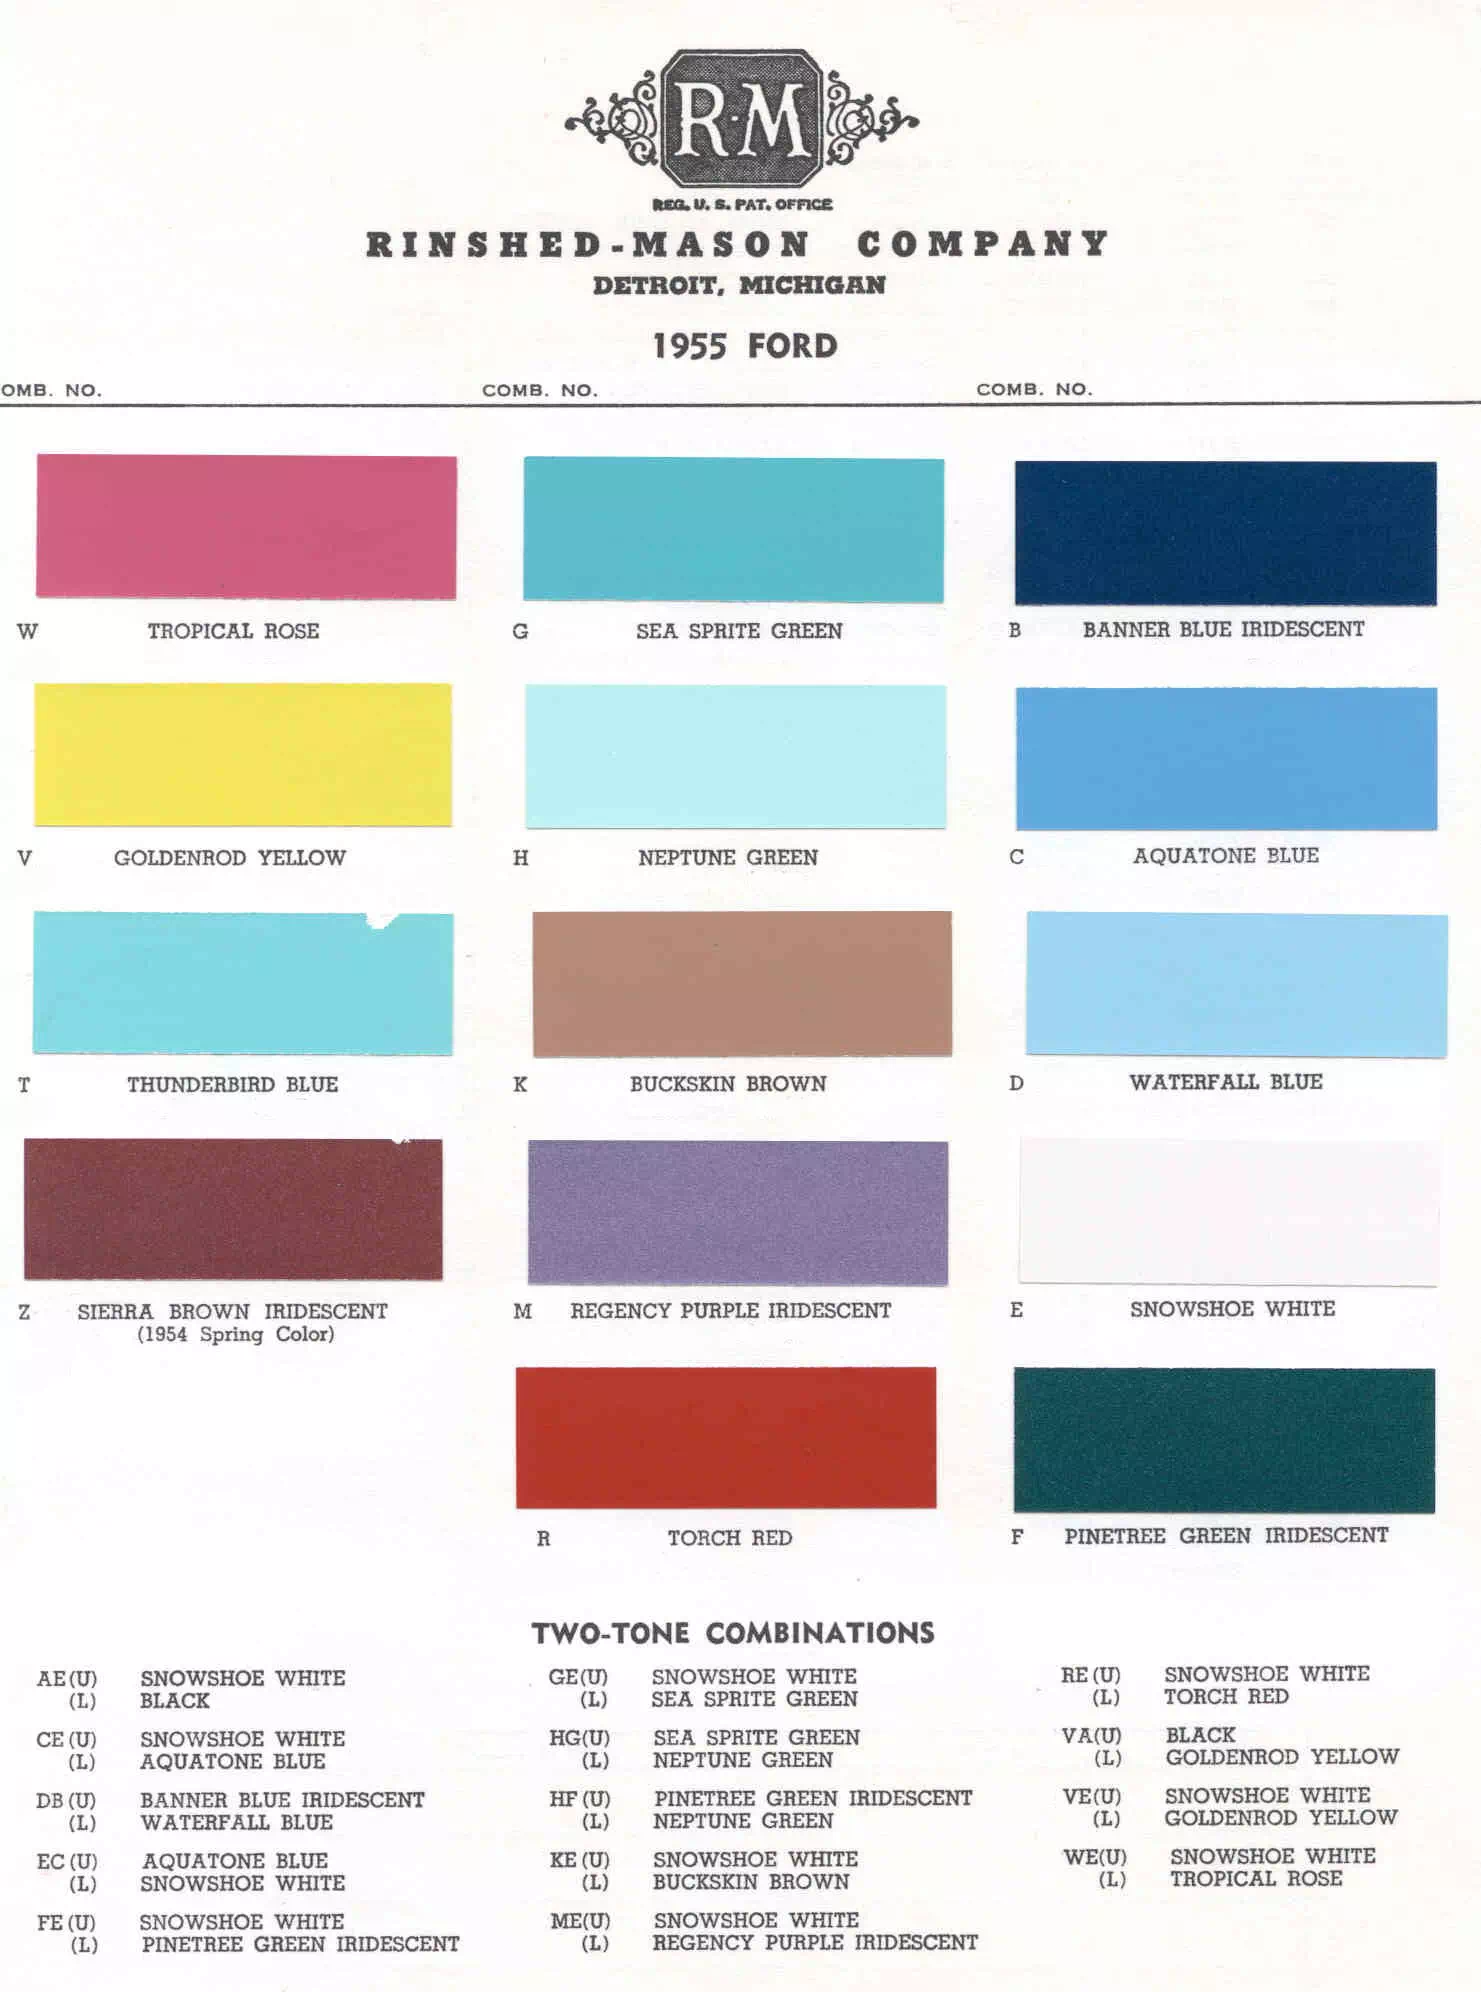 exterior colors, their codes, and example swatches used on the exterior of the vehicles in 1955